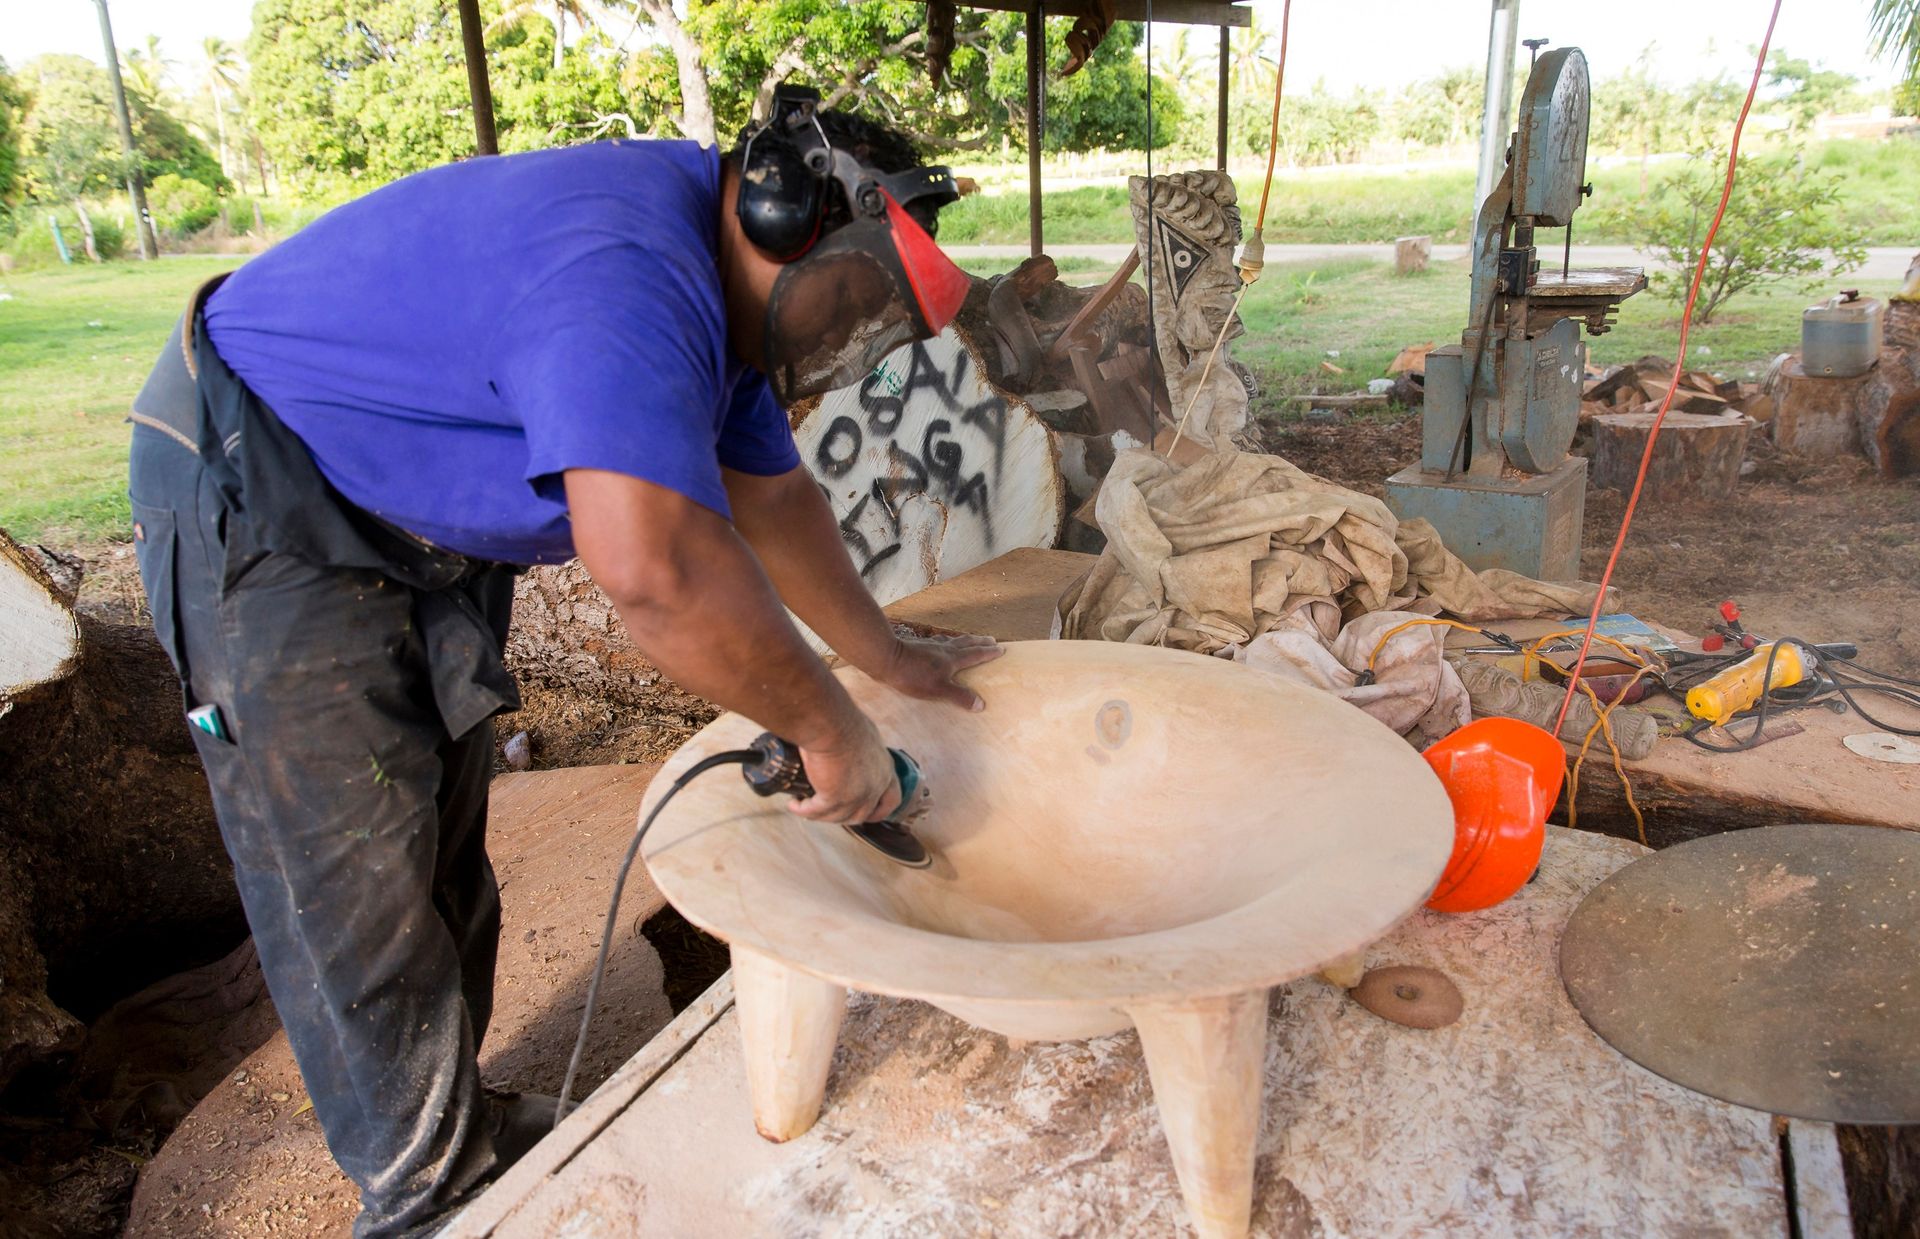 Carving and sanding wood to the right smoothness has taught Feinga that blessings come through steady effort, diligence, and patience.